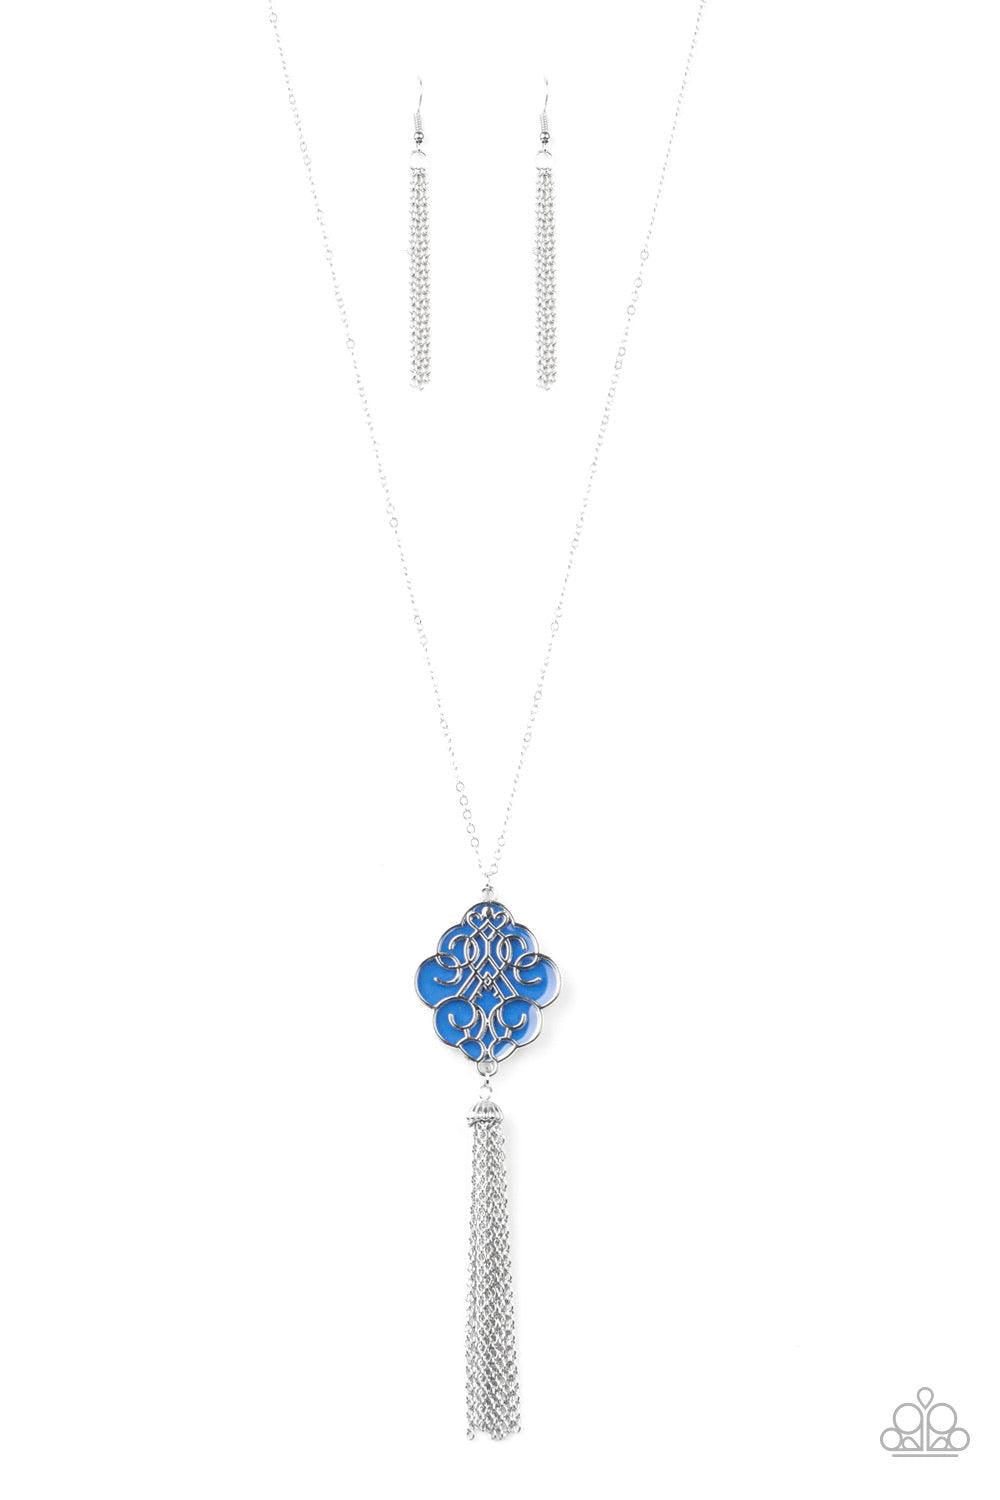 Paparazzi Accessories Malibu Mandala - Blue Shimmery silver filigree swirls across a shiny blue backdrop, coalescing into a colorful pendant. A glistening silver chain tassel swings from the bottom of the pendant for a whimsical finish. Features an adjust